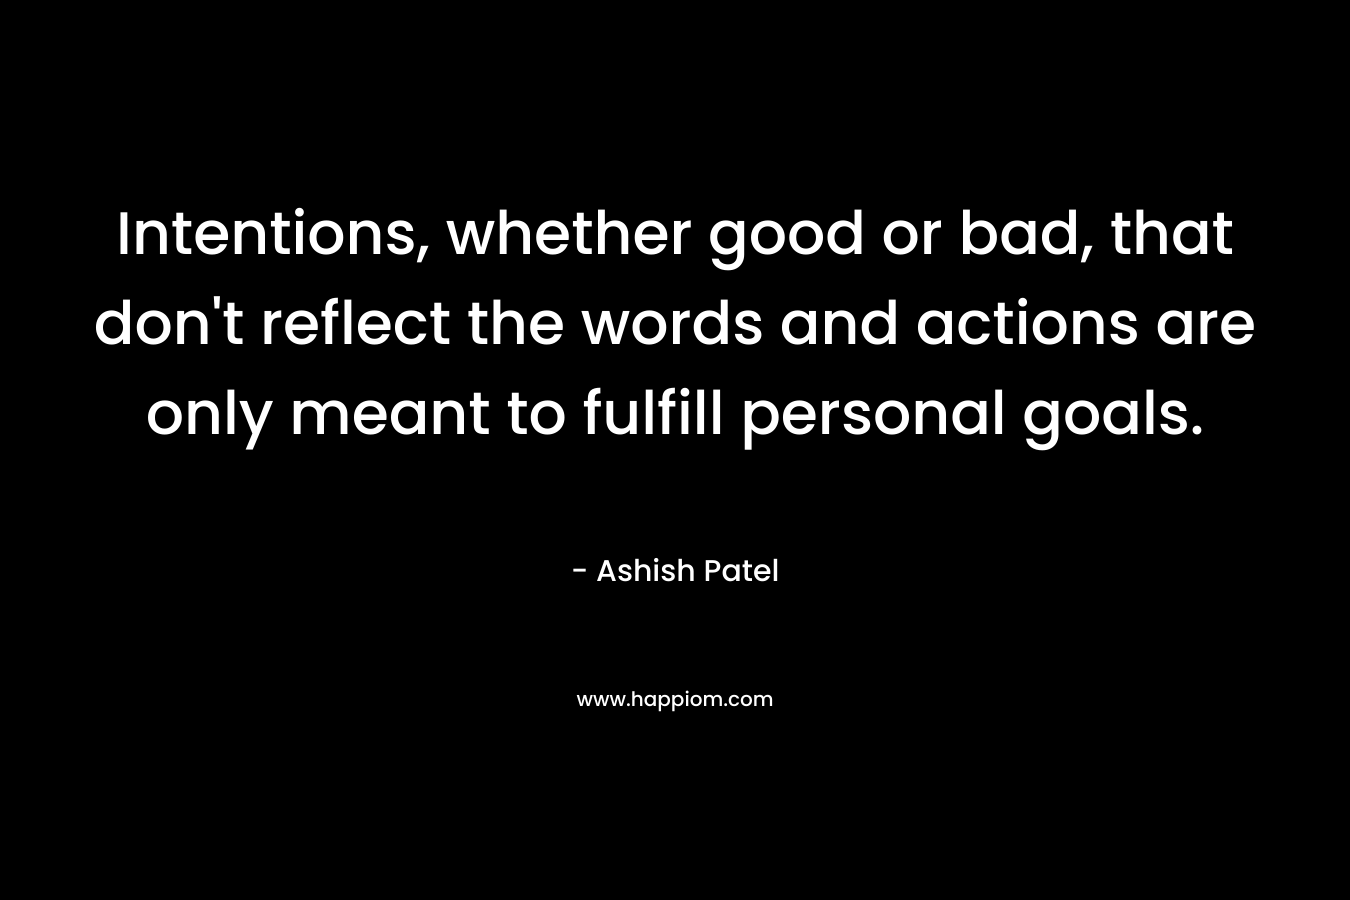 Intentions, whether good or bad, that don't reflect the words and actions are only meant to fulfill personal goals.